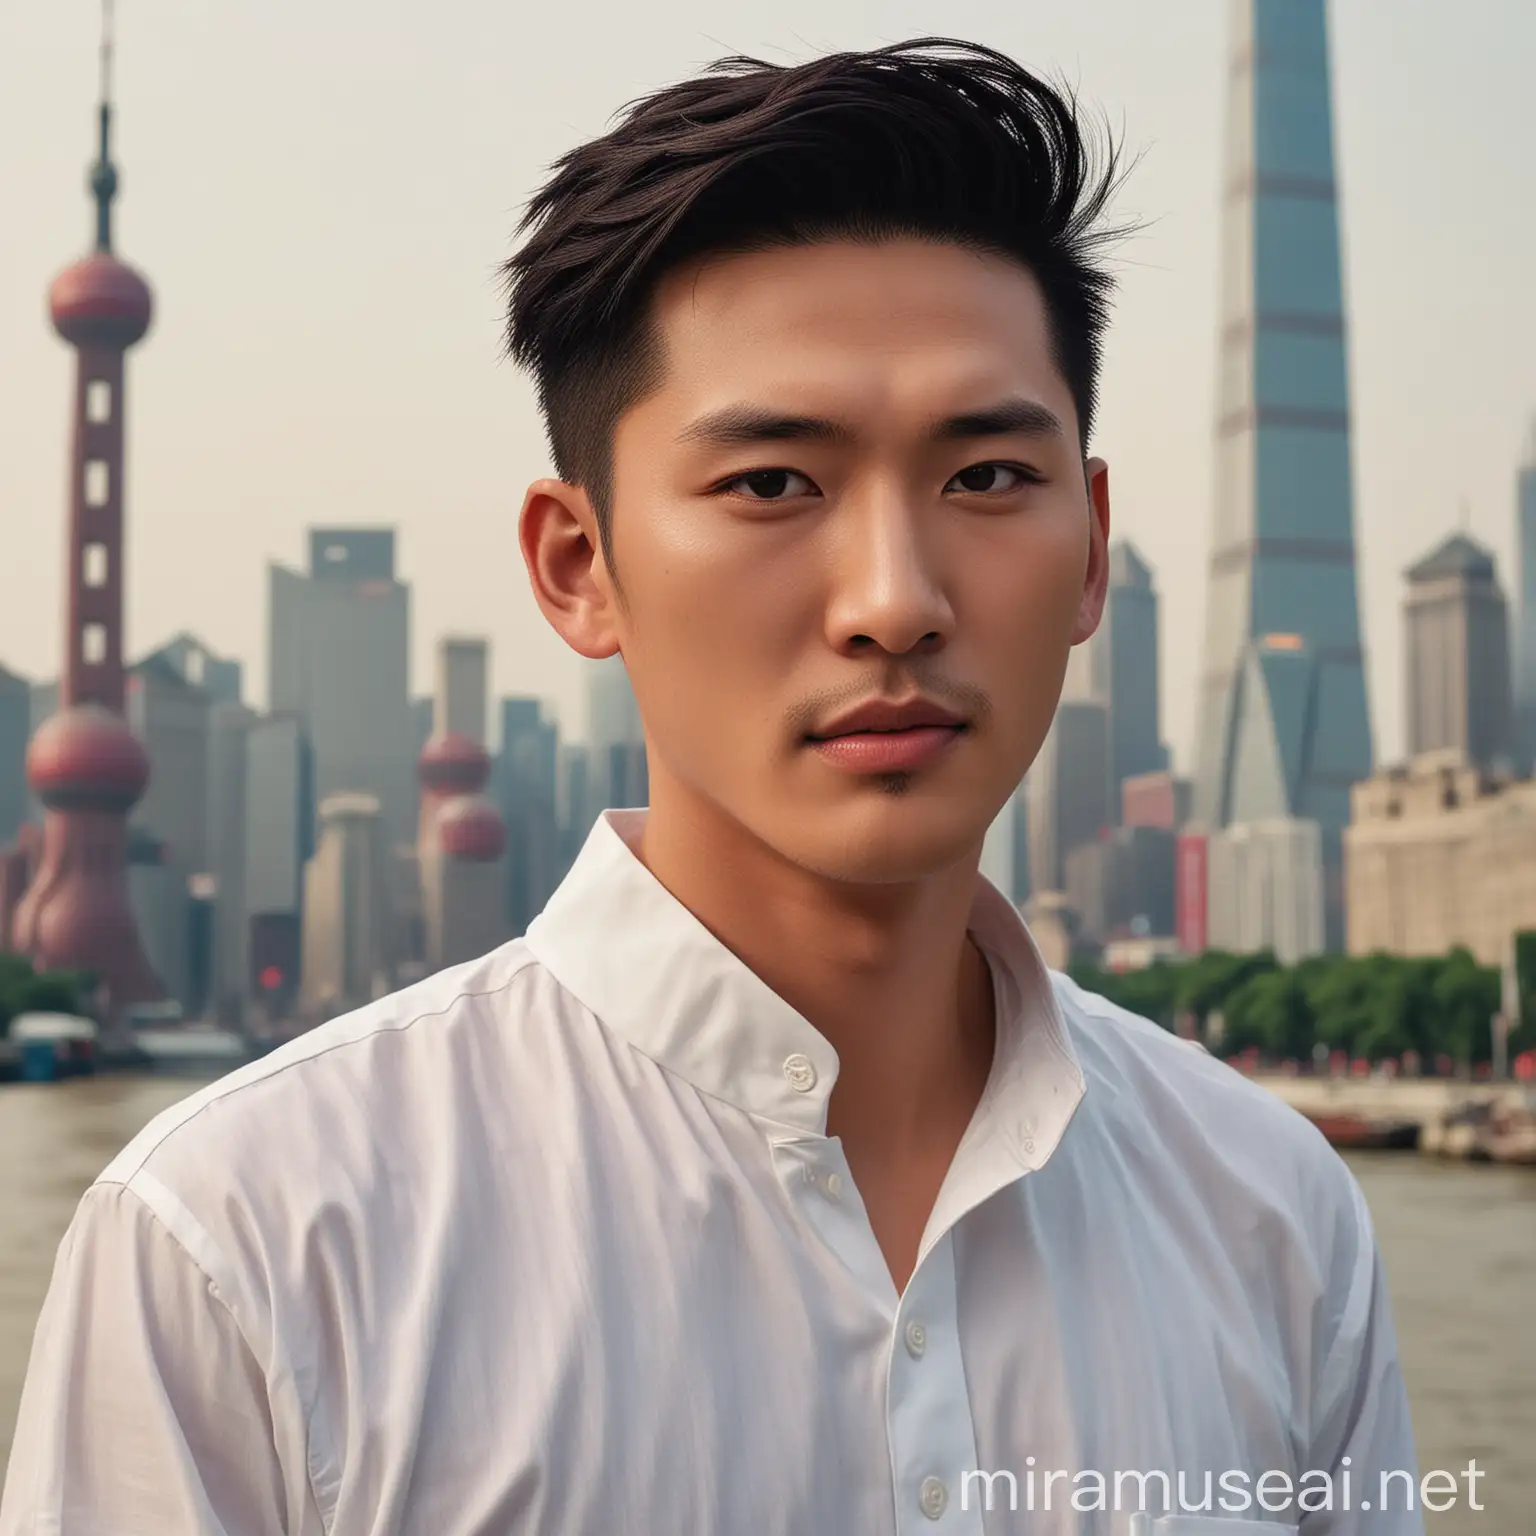 In this video, we introduce a young YouTuber with a striking resemblance to the Chinese actor Hu Ge. He sports a neat short hairstyle slicked back, paired with a crisp white shirt, giving him a clean and sophisticated look. His Chinese heritage is evident in his features. Behind him, the stunning cityscape of Shanghai's iconic Bund provides a dynamic and modern backdrop, highlighting the vibrant energy of the city.